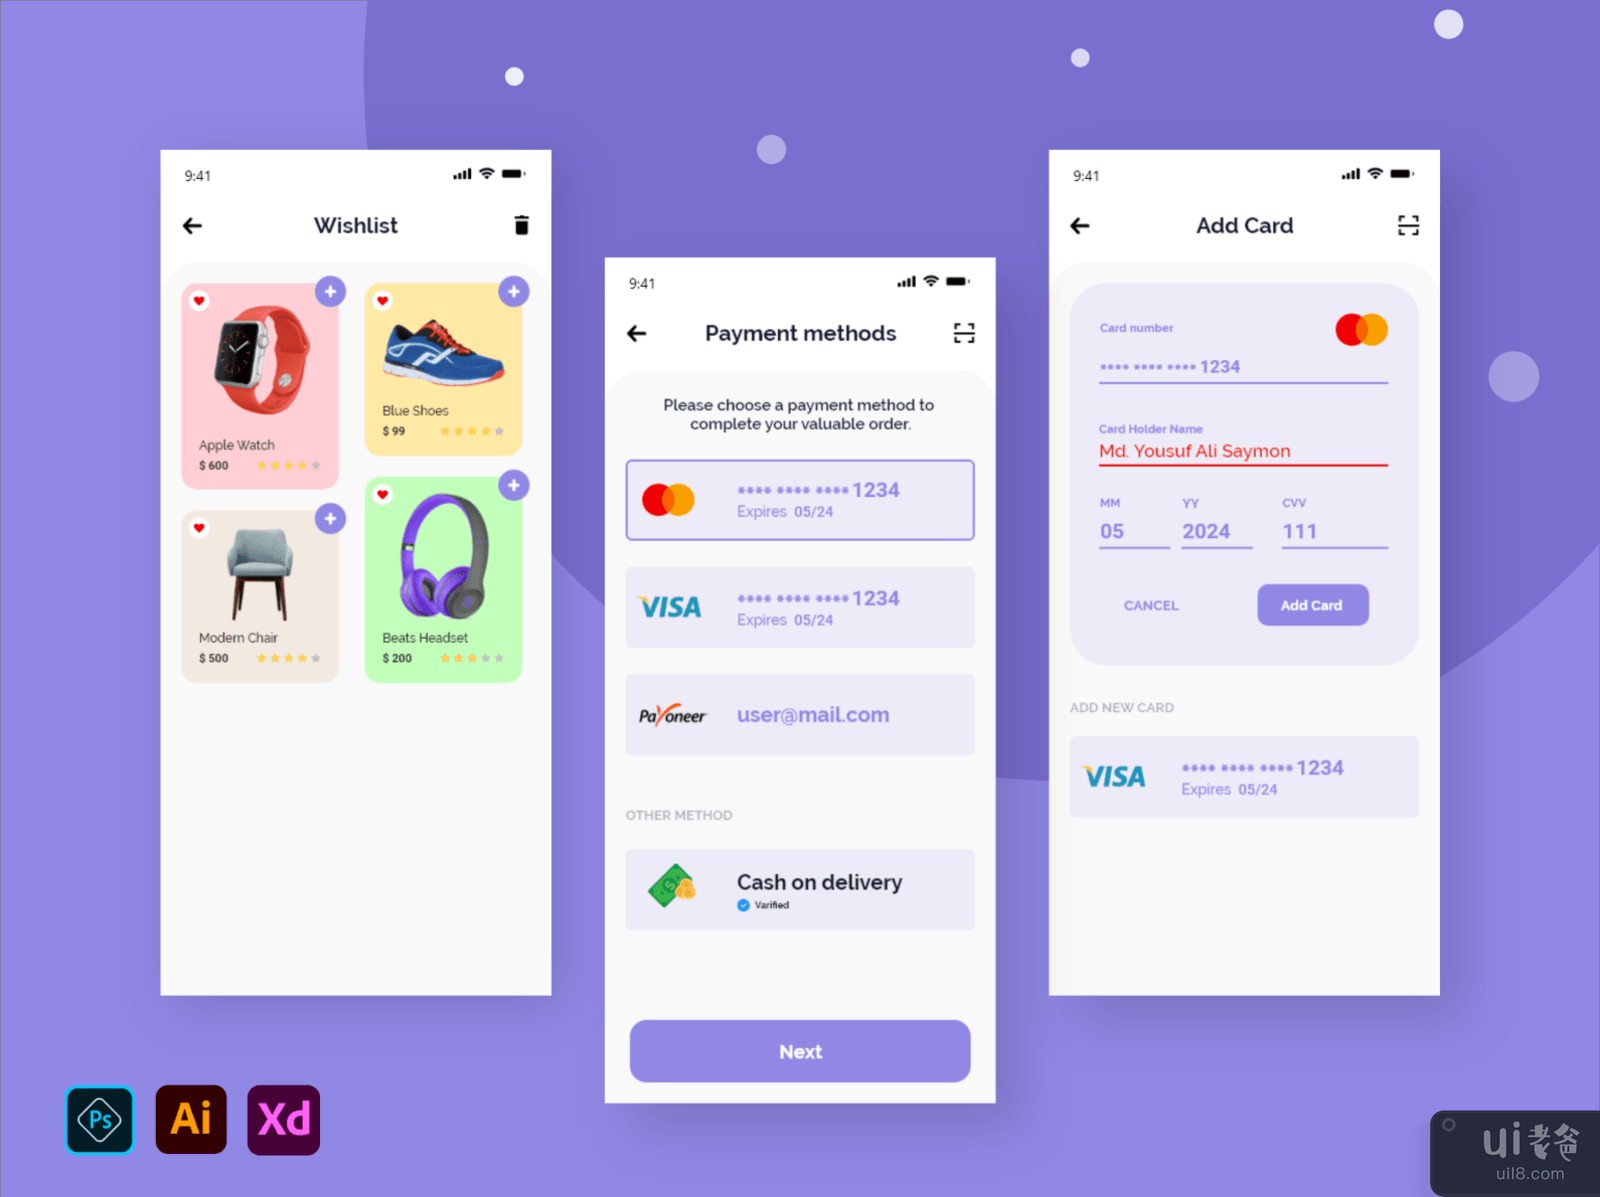 Shopping UI Kit - Payment and Wishlist